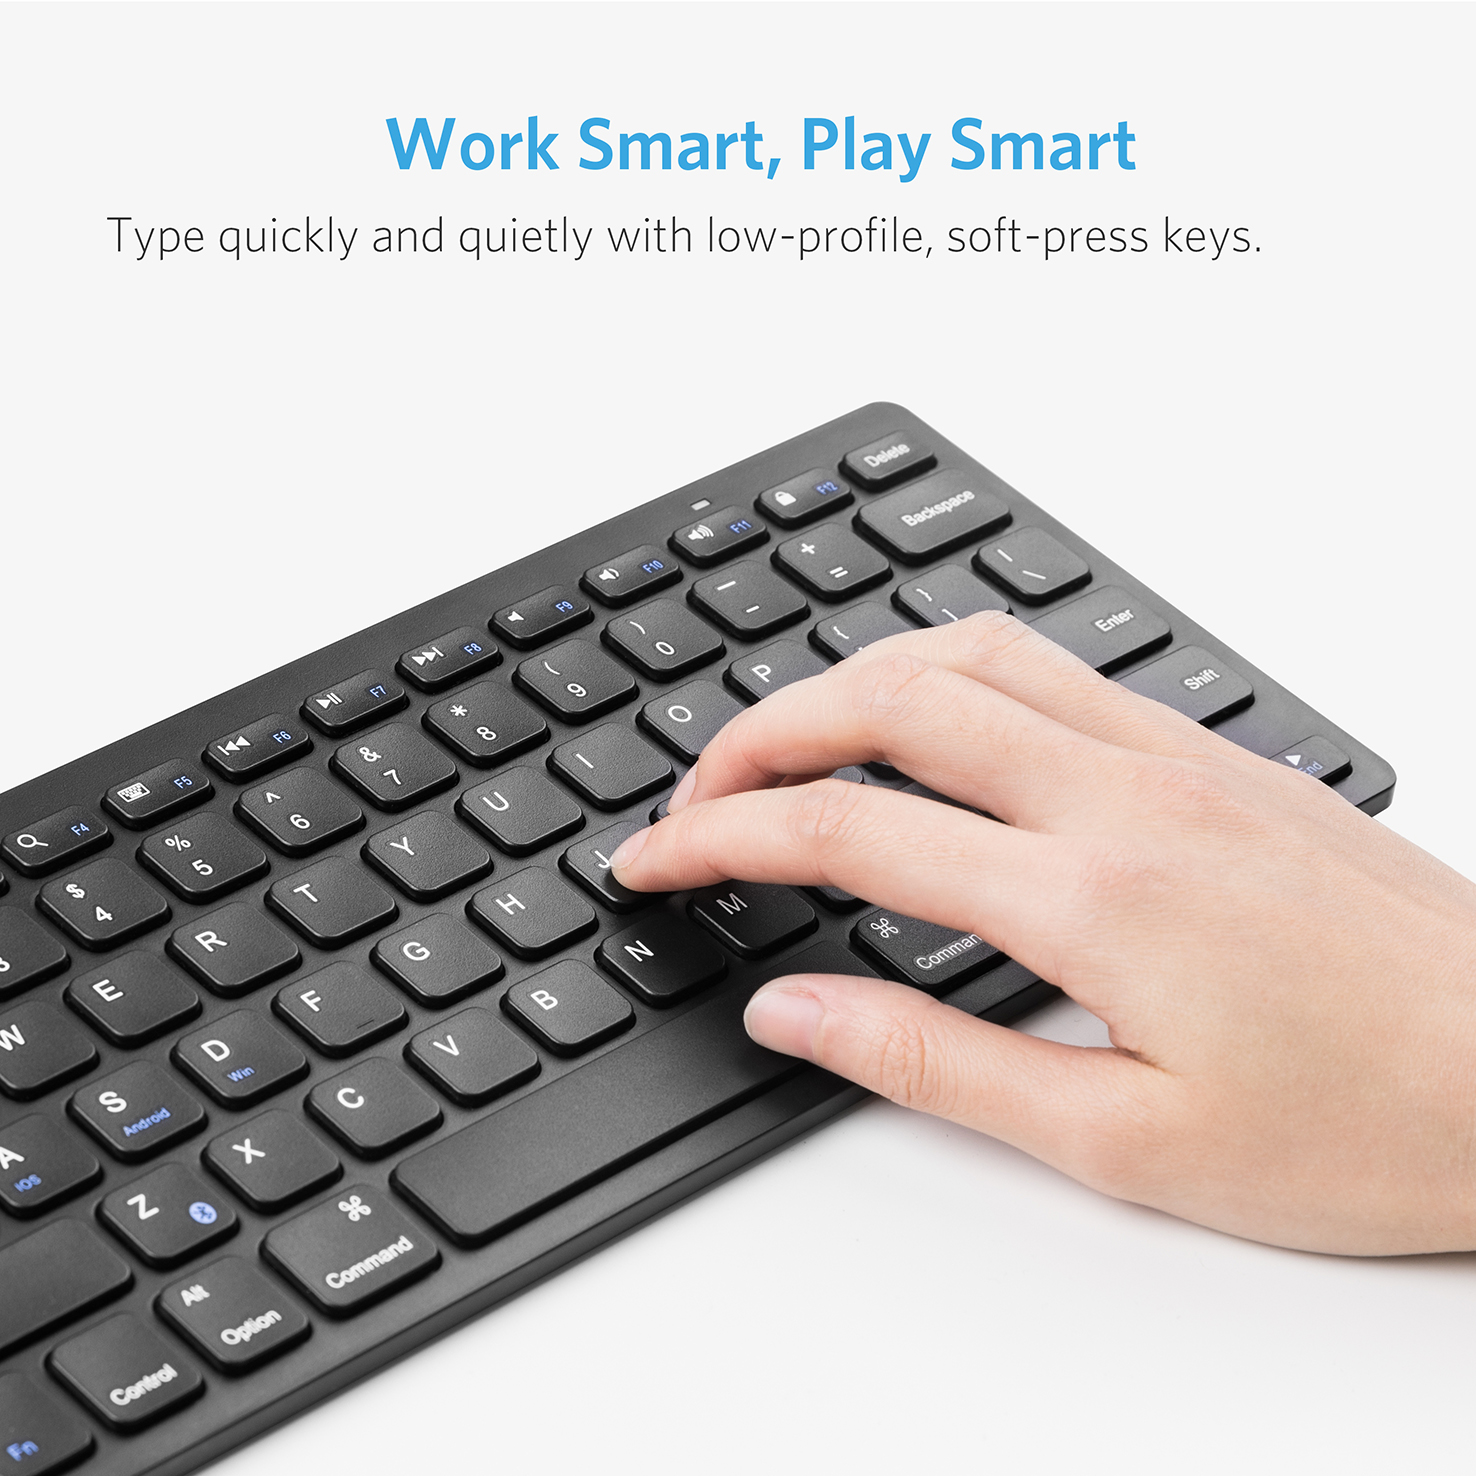 Anker Bluetooth Ultra-Slim Keyboard for iPad, Galaxy Tabs and Other Mobile Devices, Black - image 4 of 6